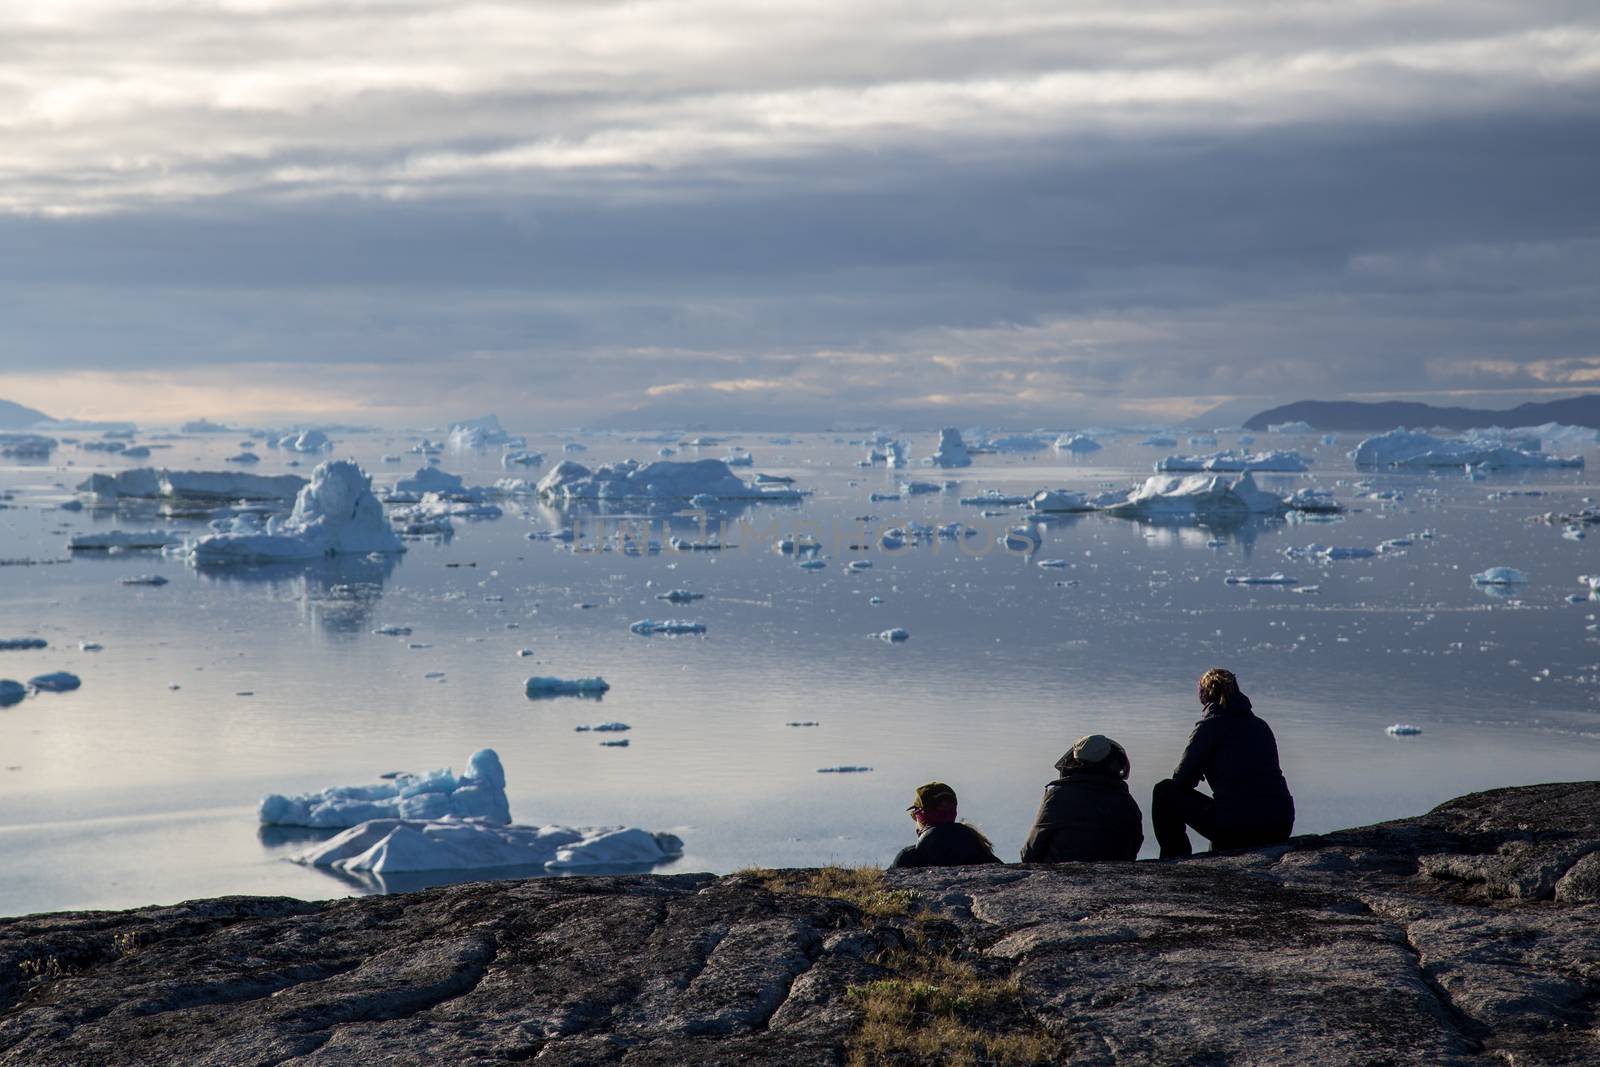 Rodebay, Greenland - July 09, 2018: A group of people sitting and looking at icebergs. Rodebay, also known as Oqaatsut is a fishing settlement north of Ilulissat.